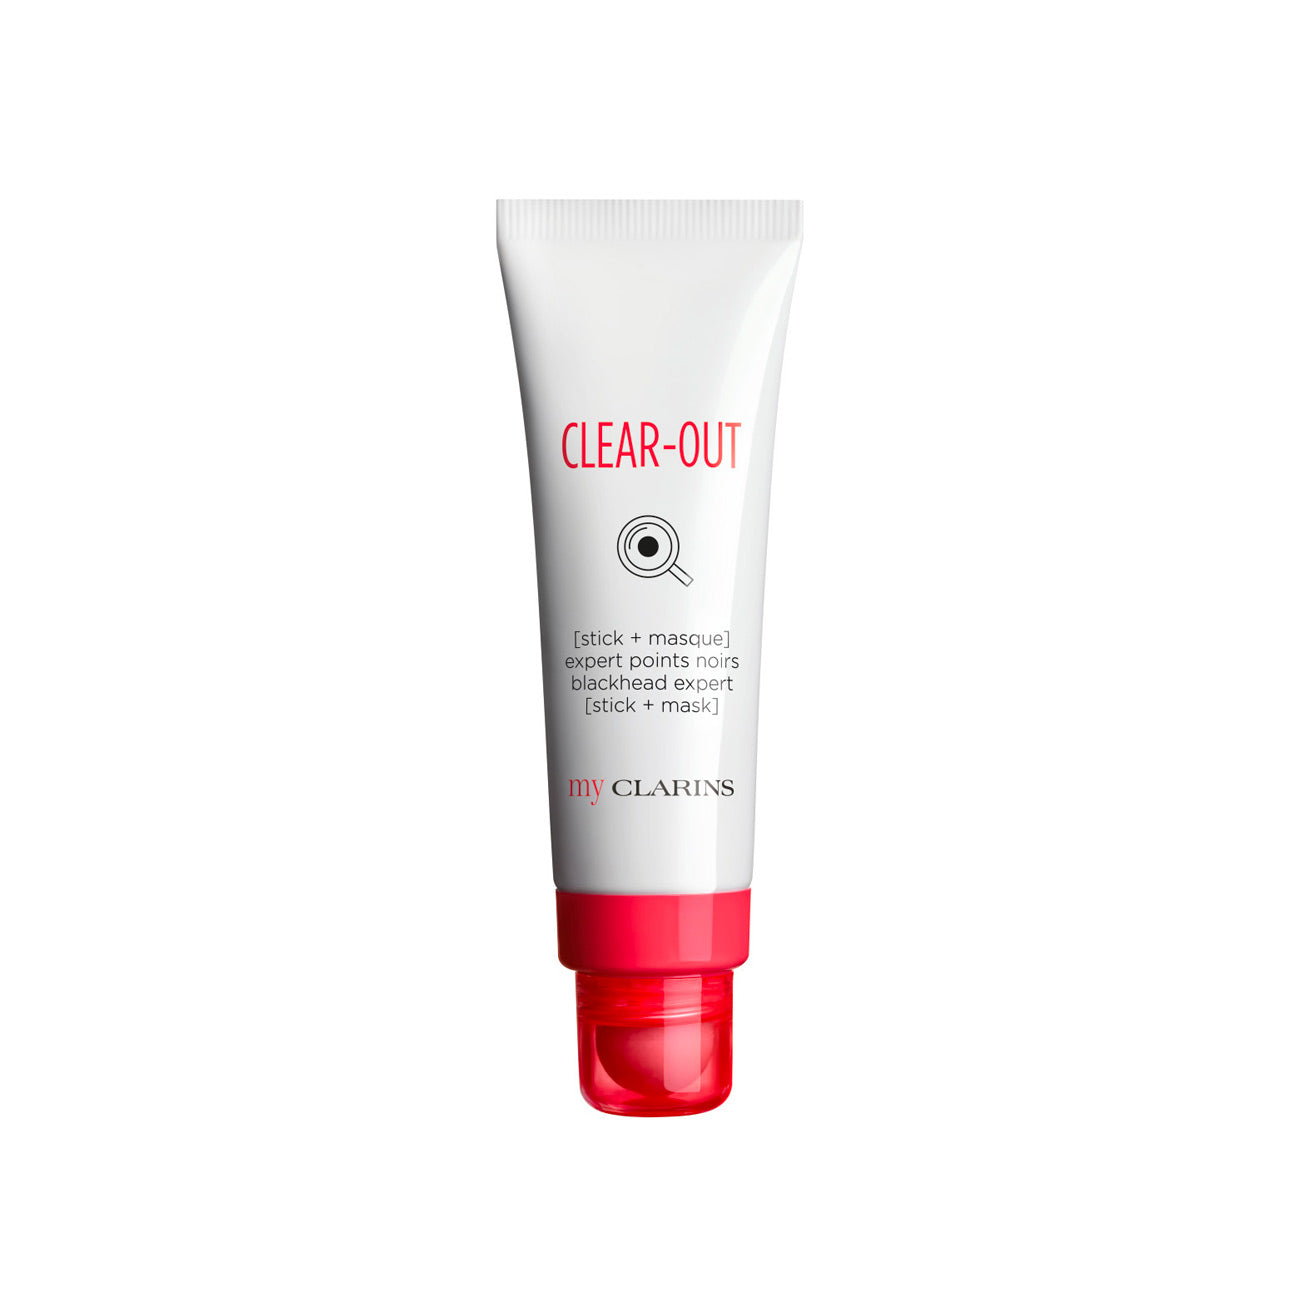 My Clarins Clear-Out Blackhead Expert [Stick + Mask] - MazenOnline